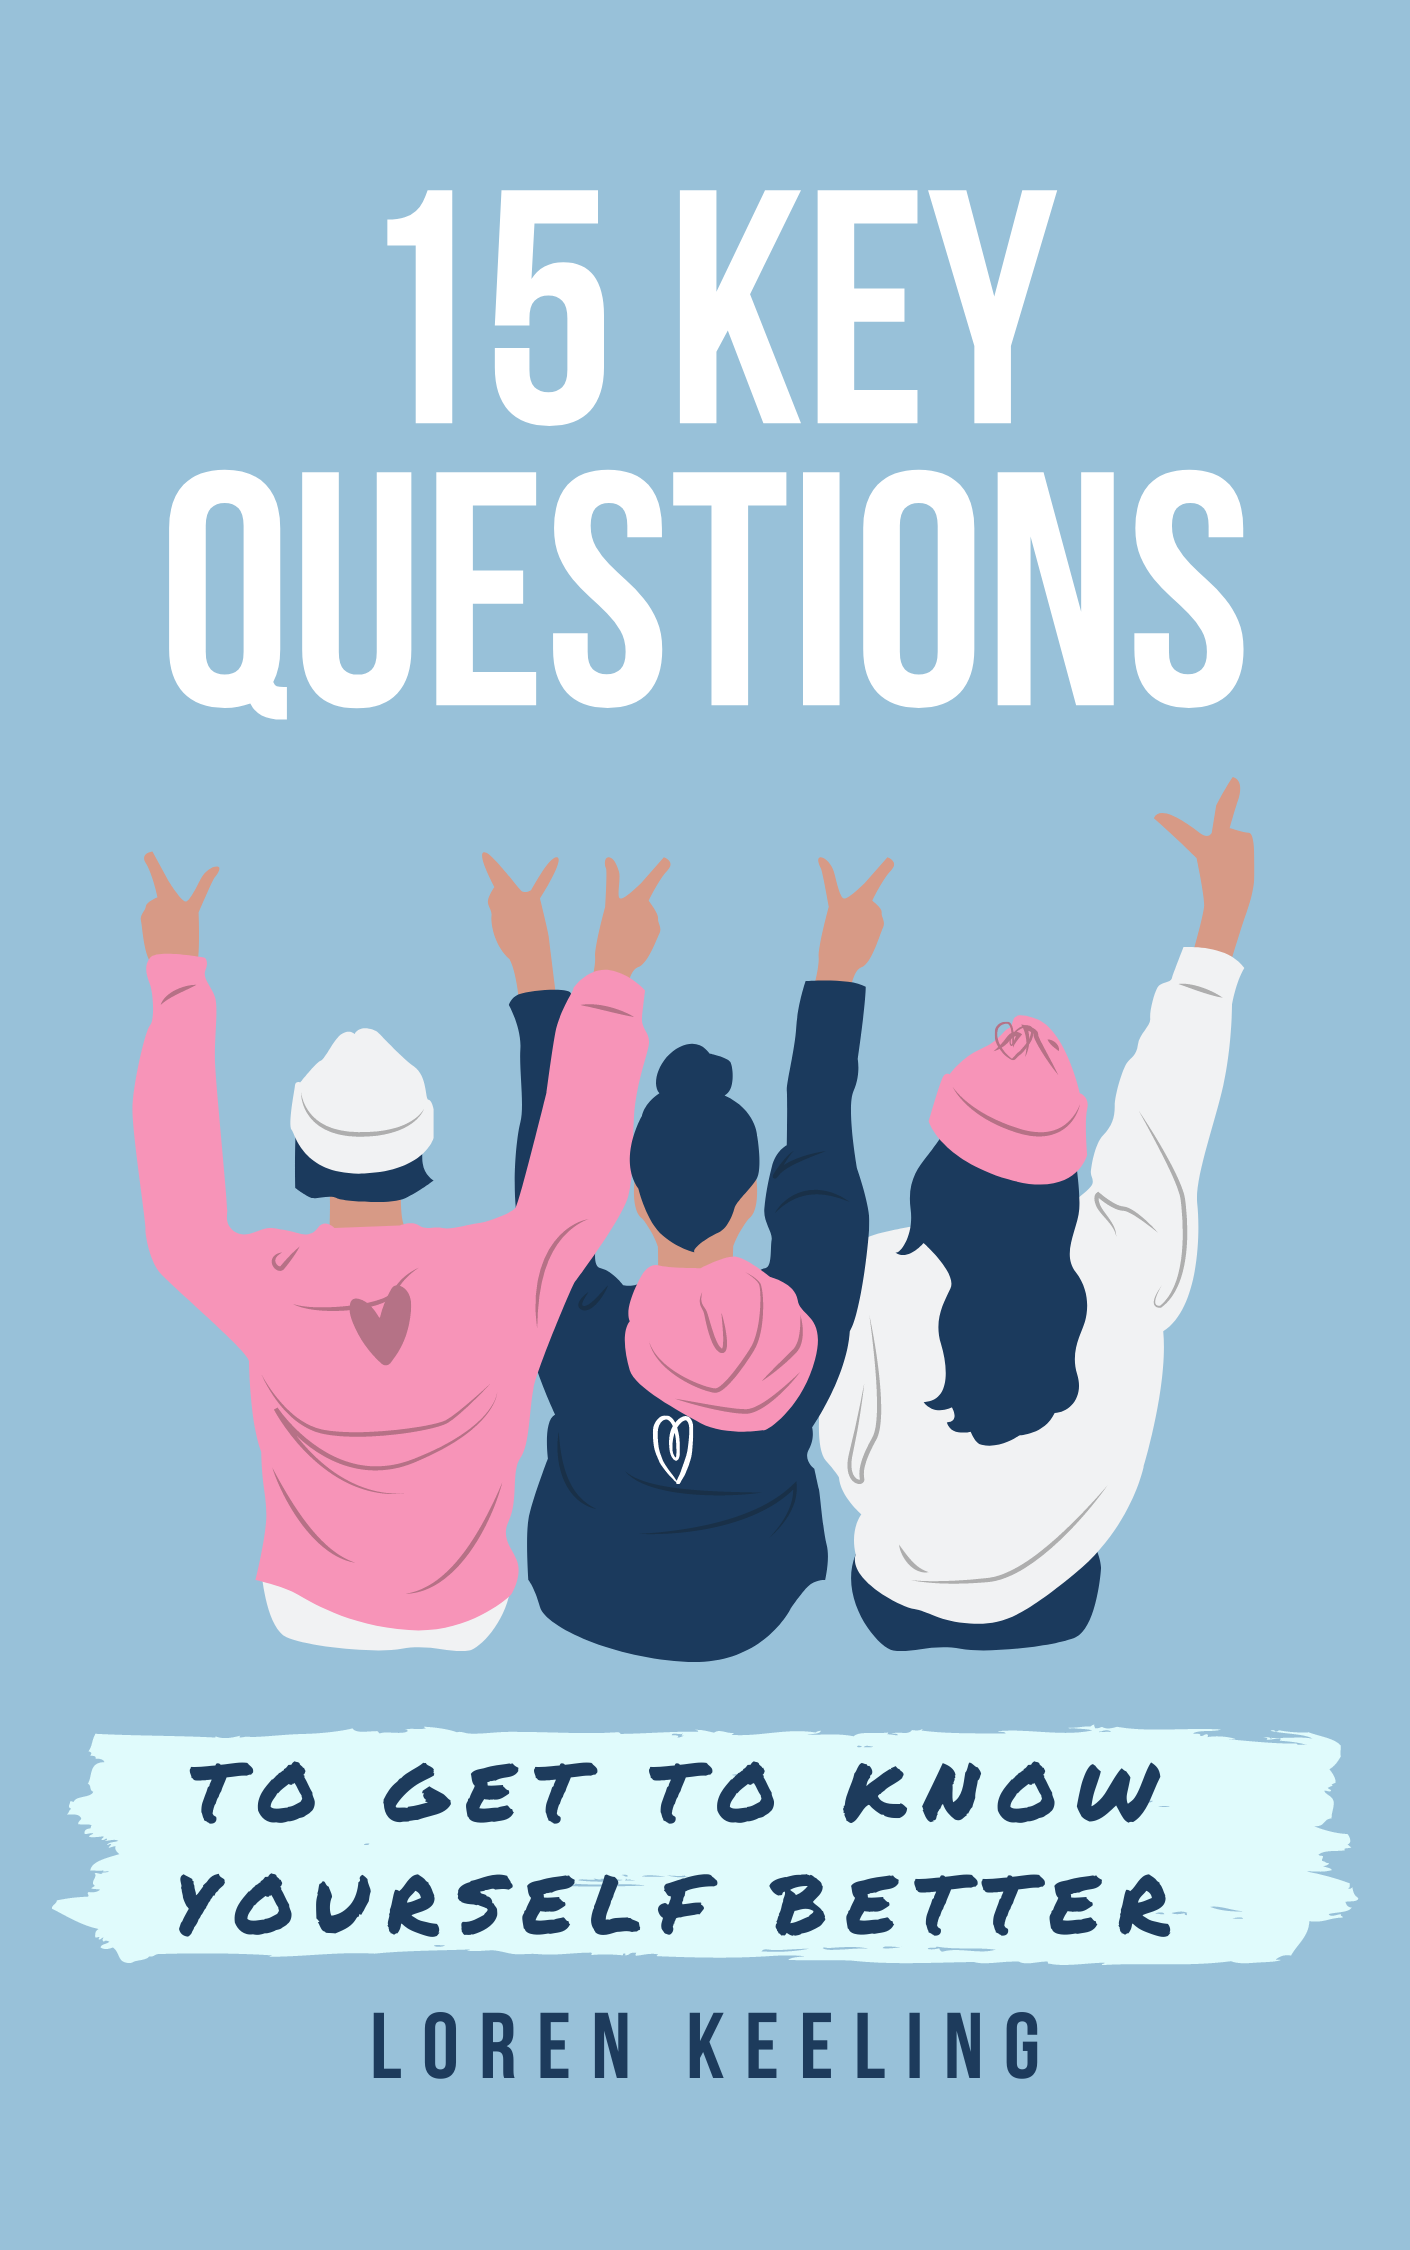 15 Key Questions to get to know yourself